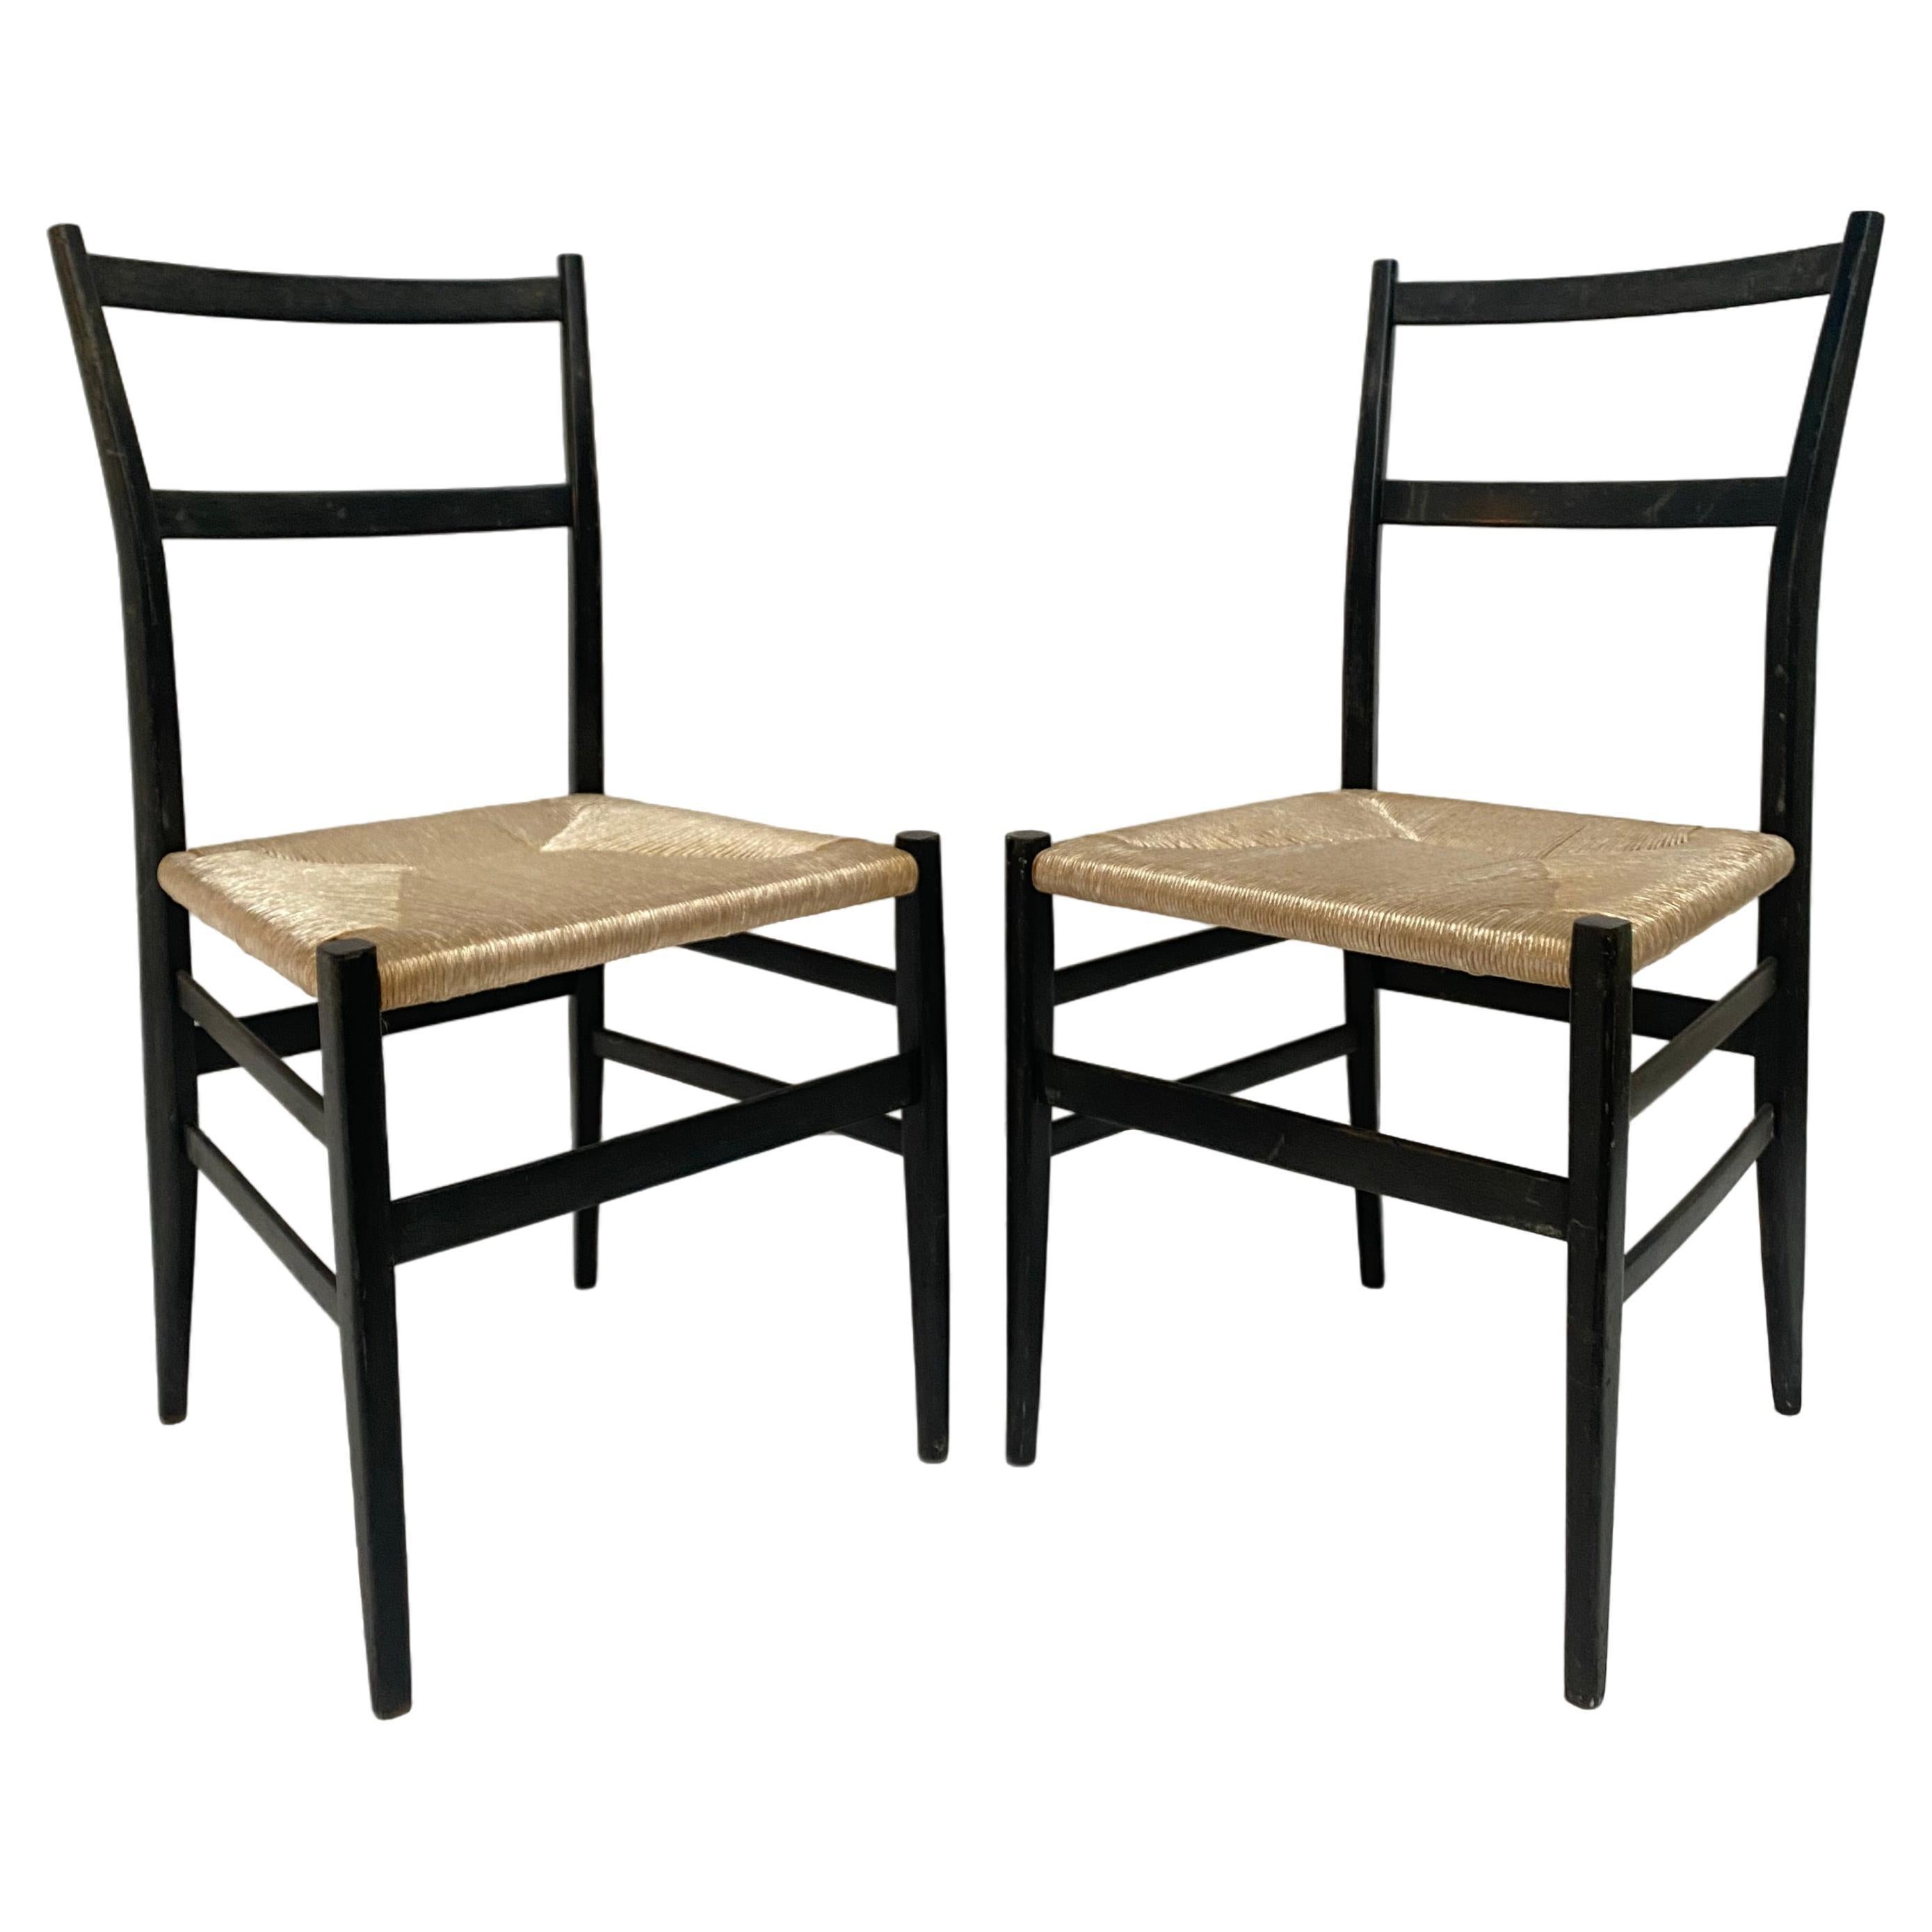 Pair of Leggera Black Ebonized Wooden Dining Chairs by Gio Ponti, Italy, 1950s For Sale